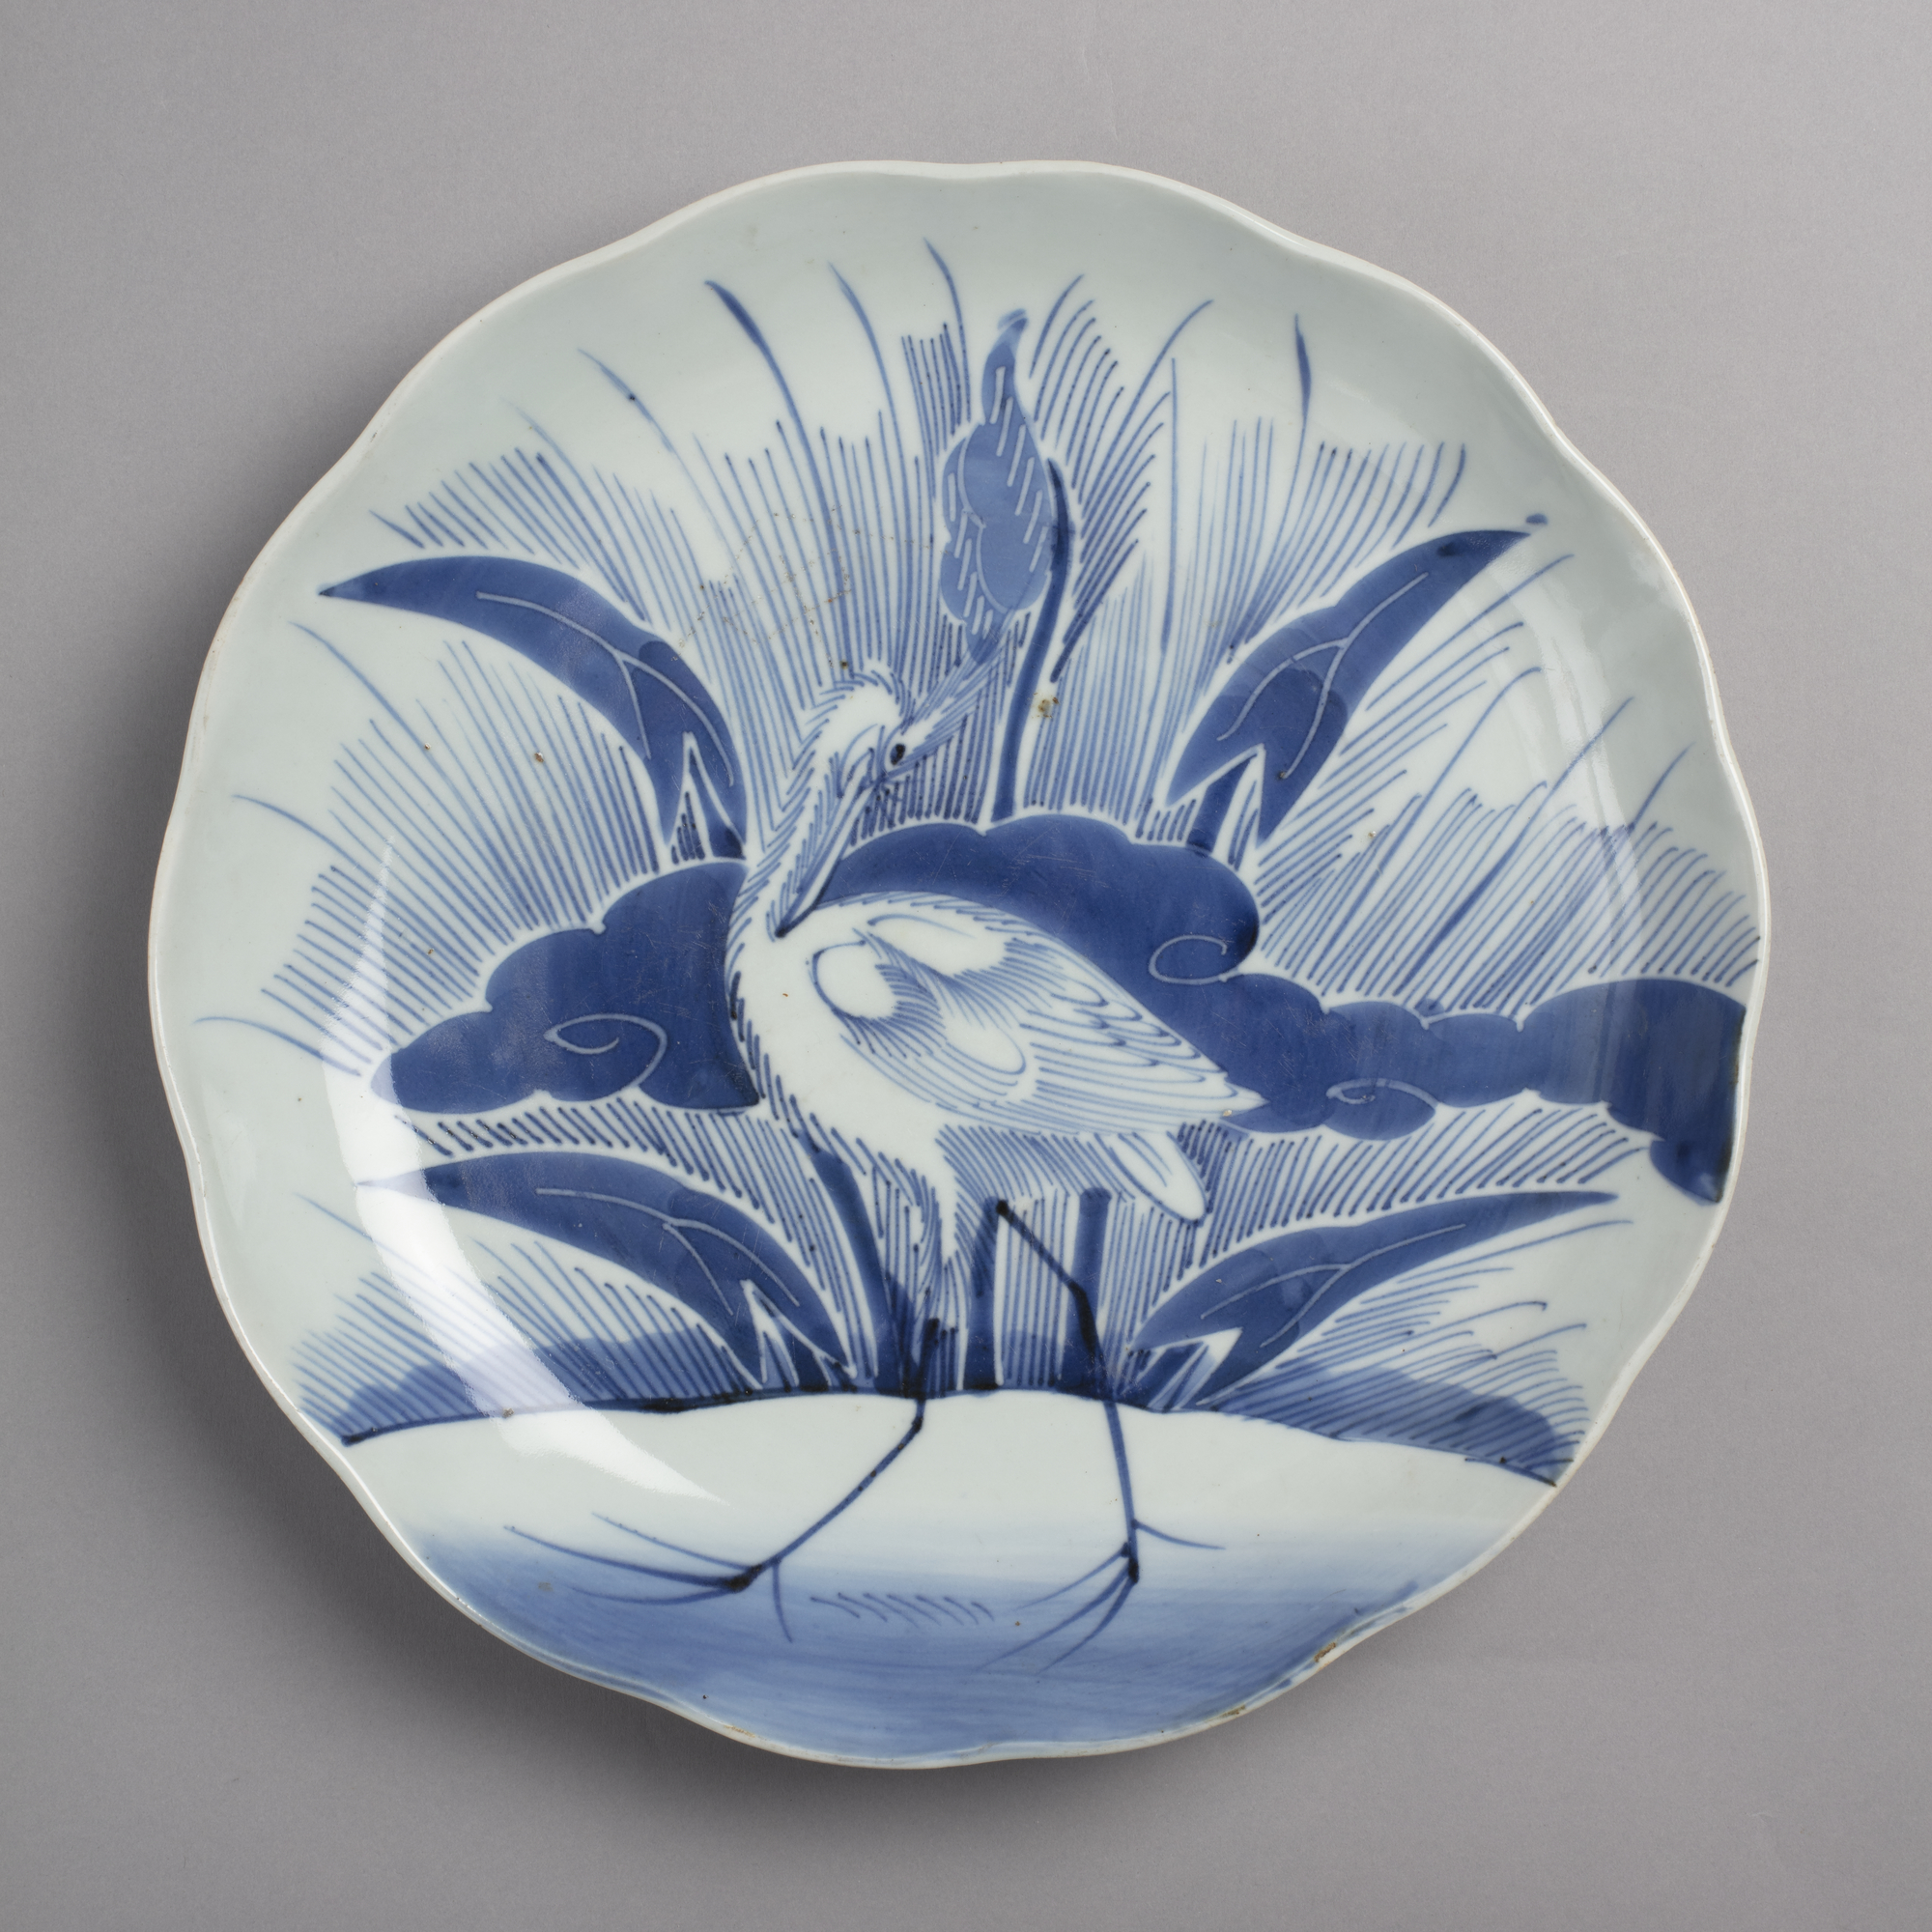 Large dish with blue on white design of heron and arrowhead plant